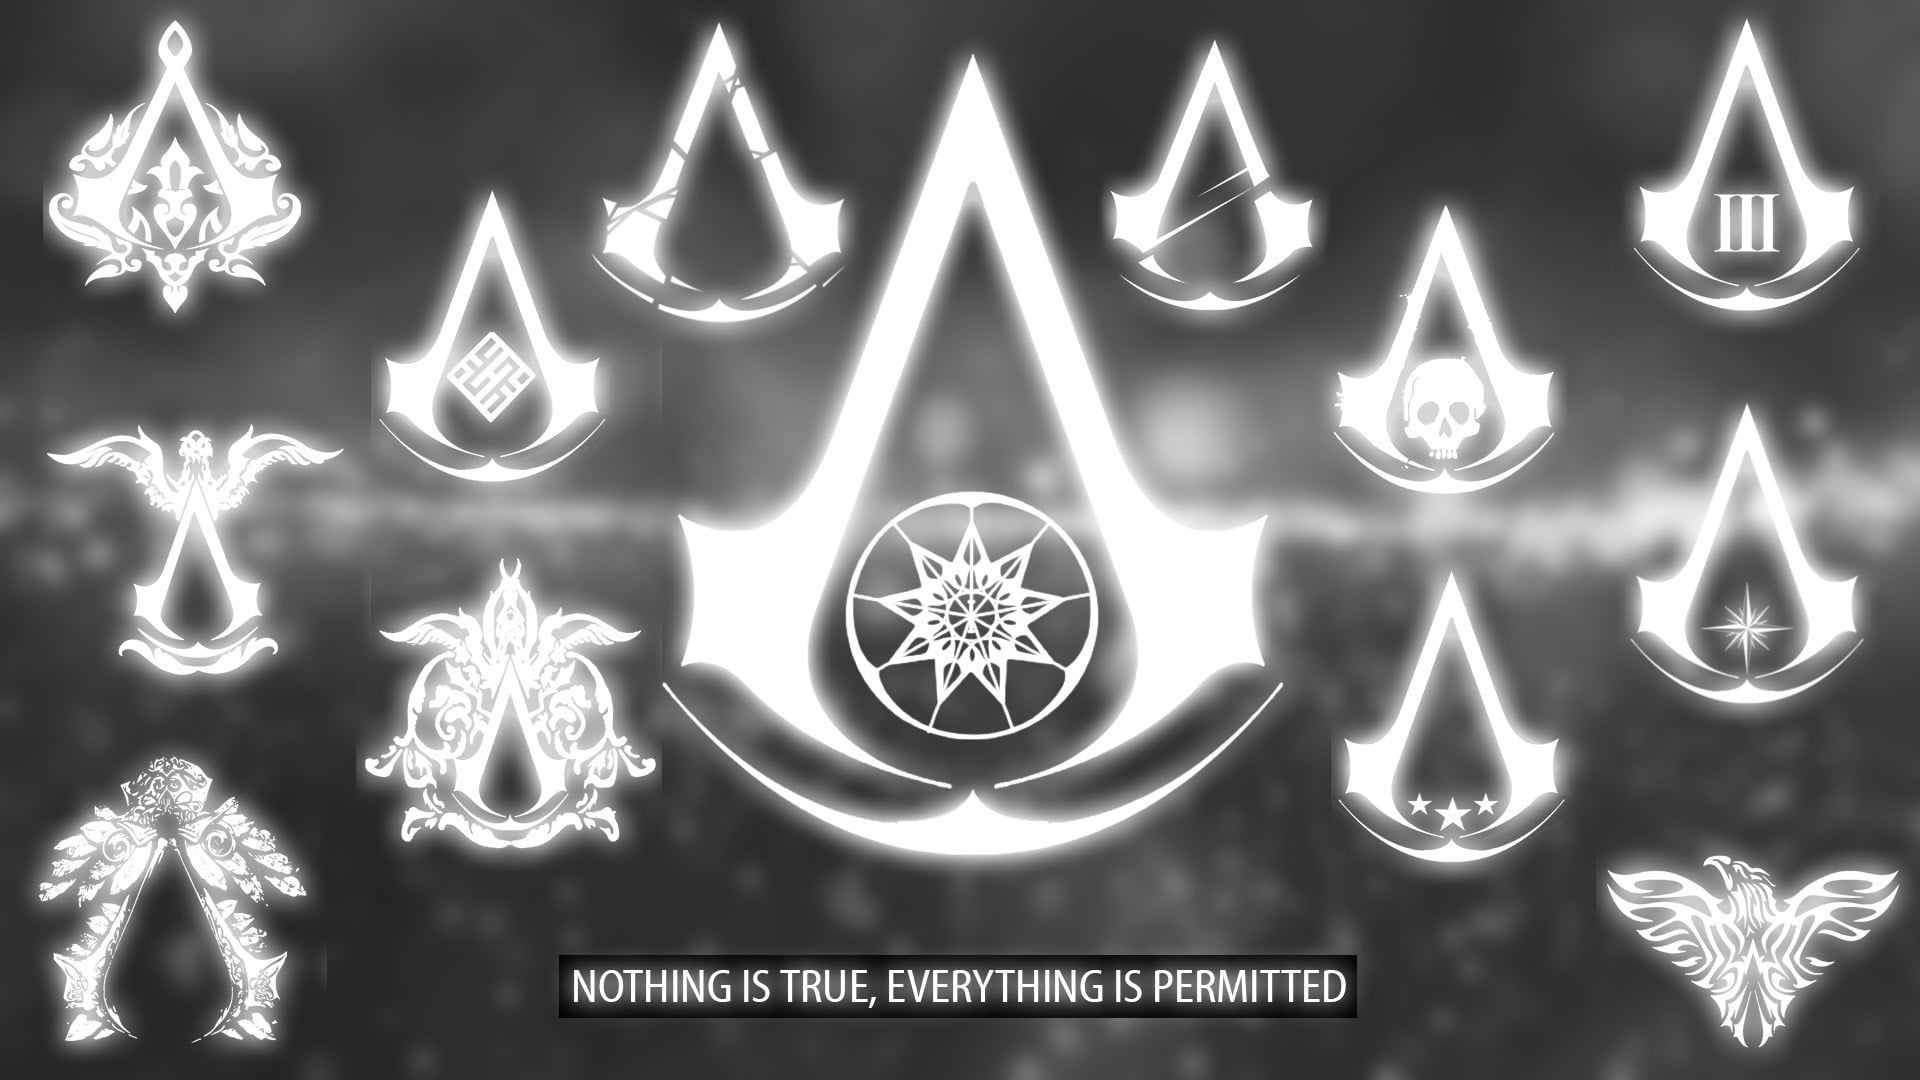 Assassin's Creed logo, photo of Assassin's Creed logo with nothing is true, everything is permitted